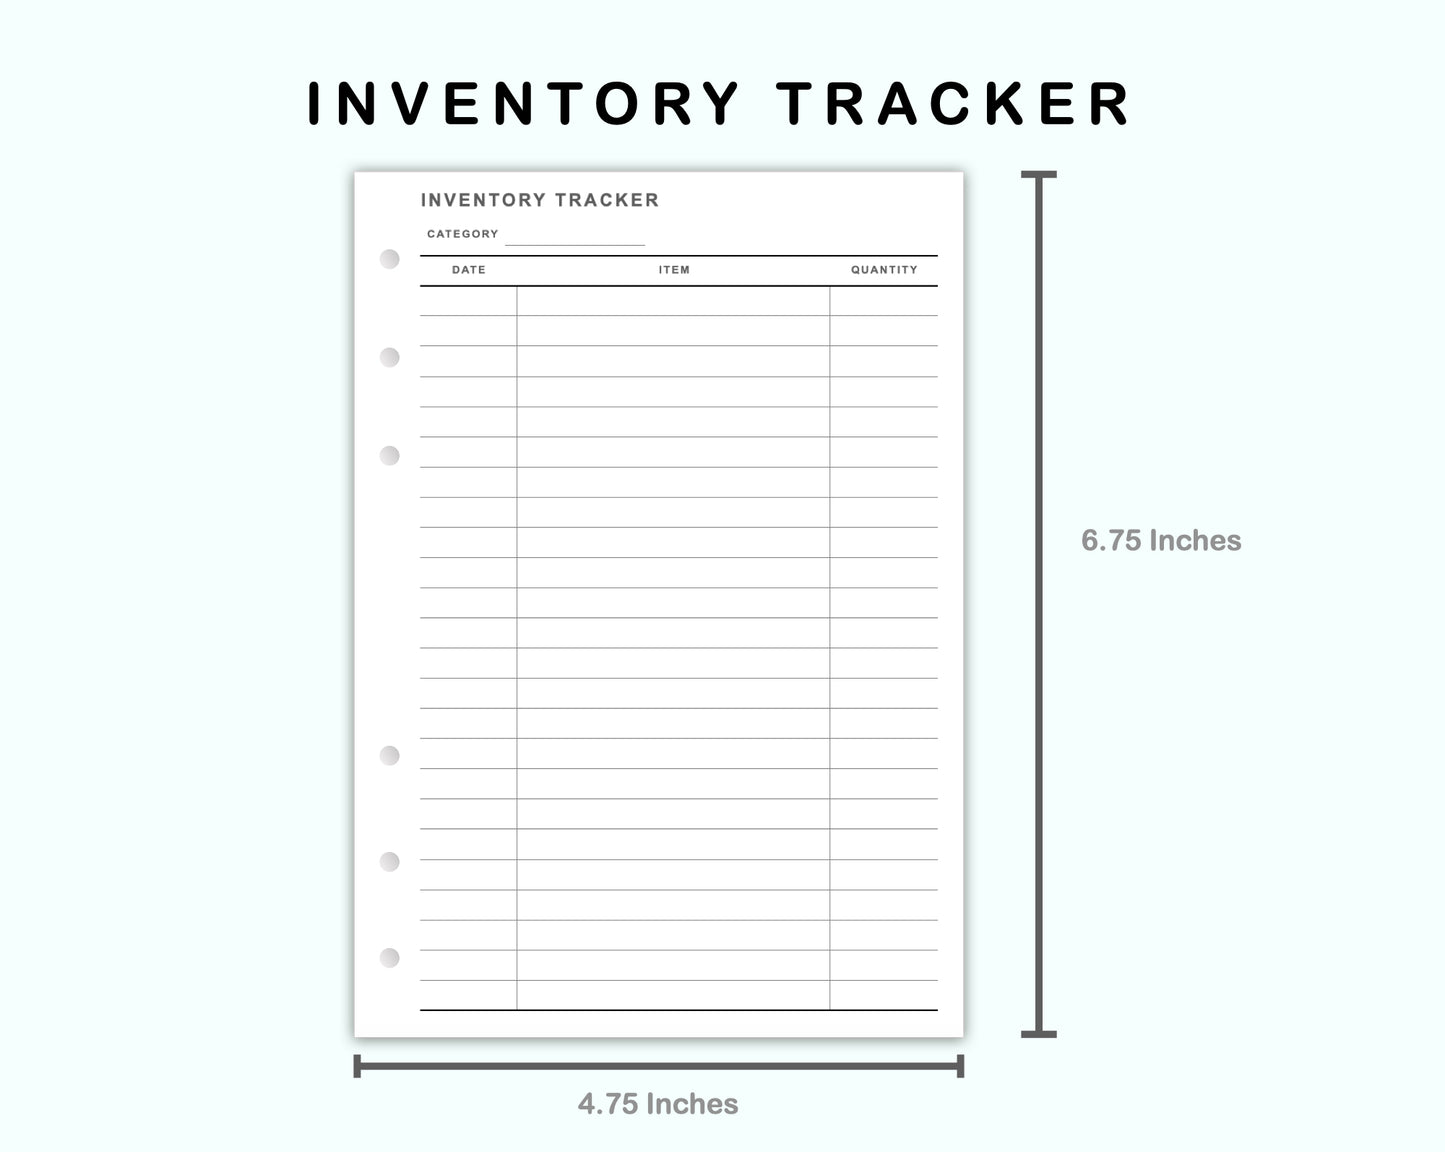 Personal Wide Inserts - Inventory Tracker